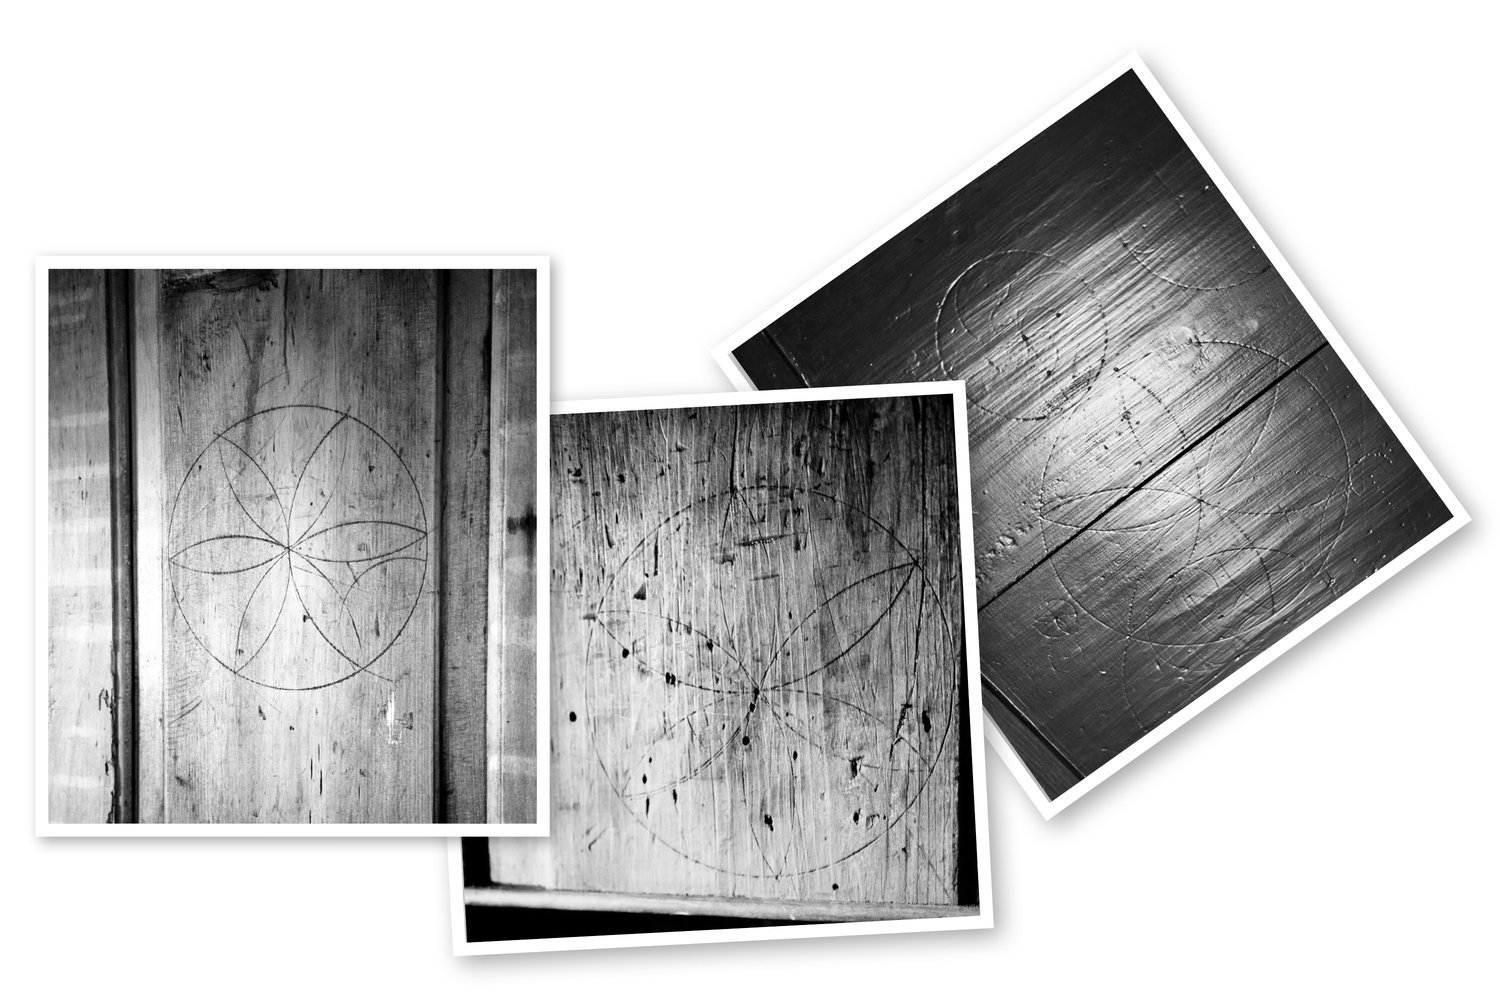 Early settlers scrawled witches marks into furniture and beams to ward off evil spirits